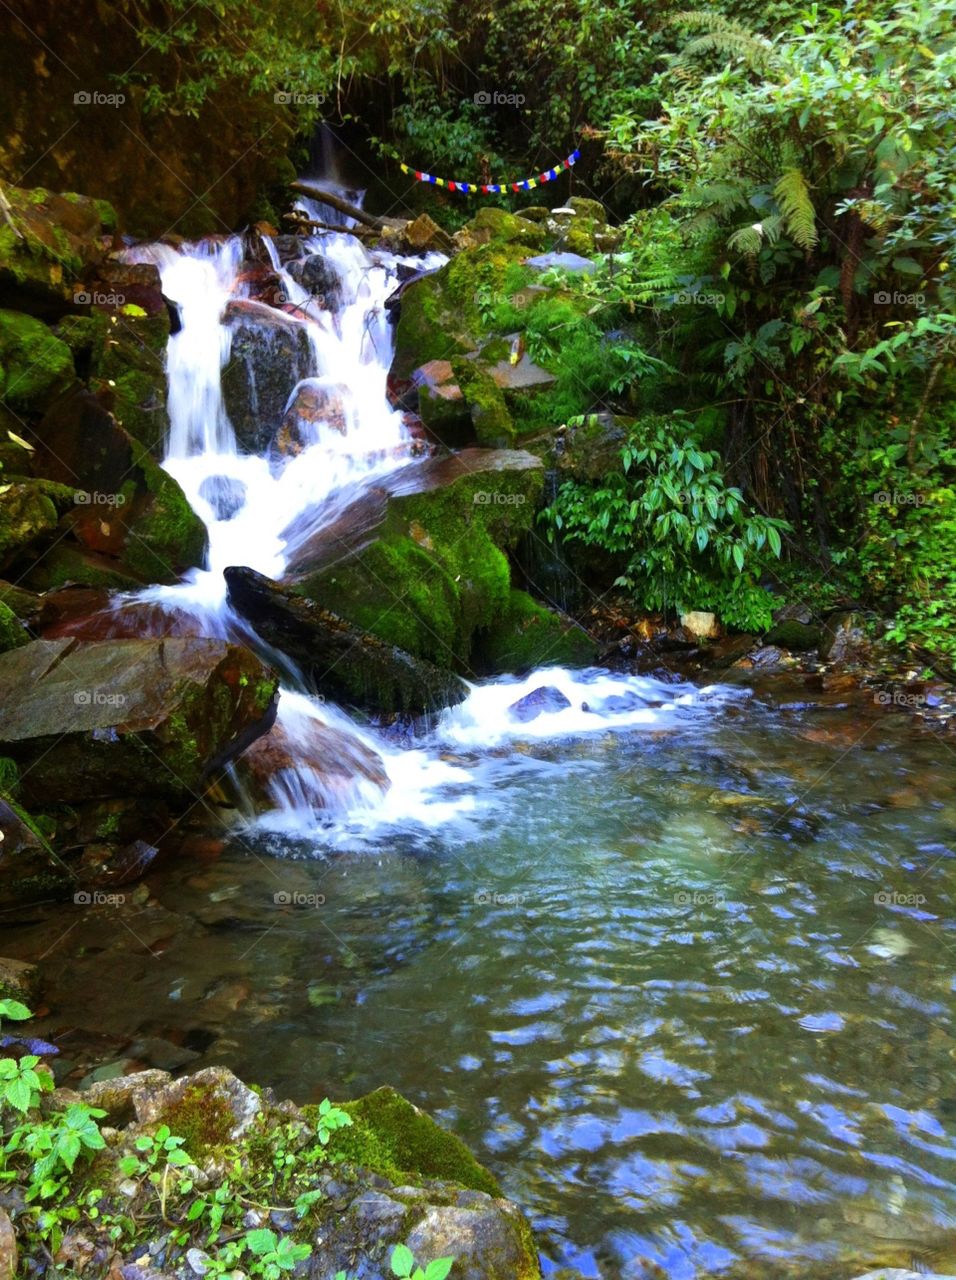 Just let your love flow like a mountain stream. And let your love grow.